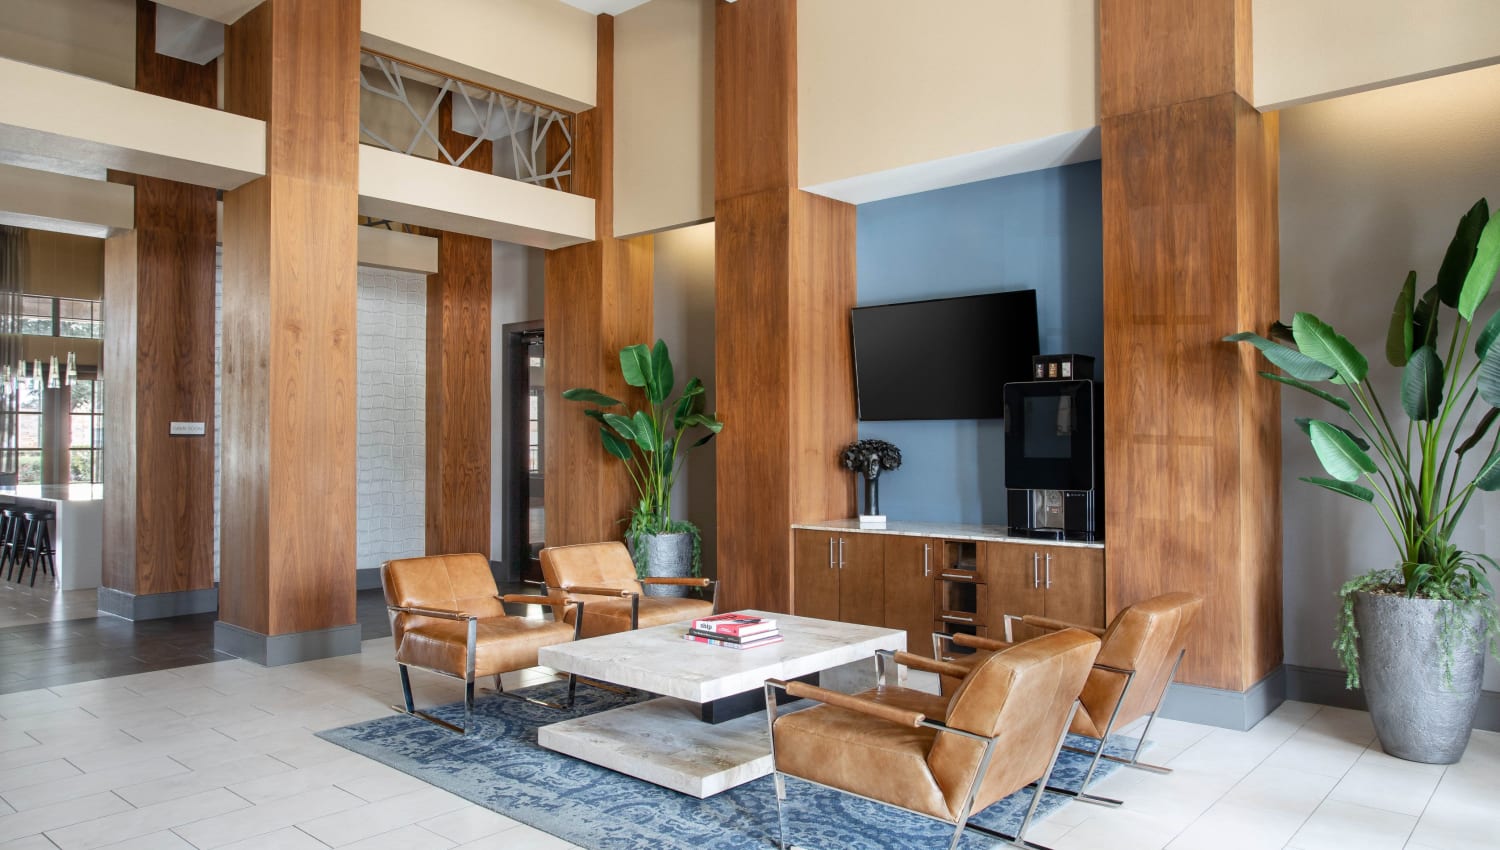 Lounge area with TV and leather chairs at Olympus Falcon Landing in Katy, Texas